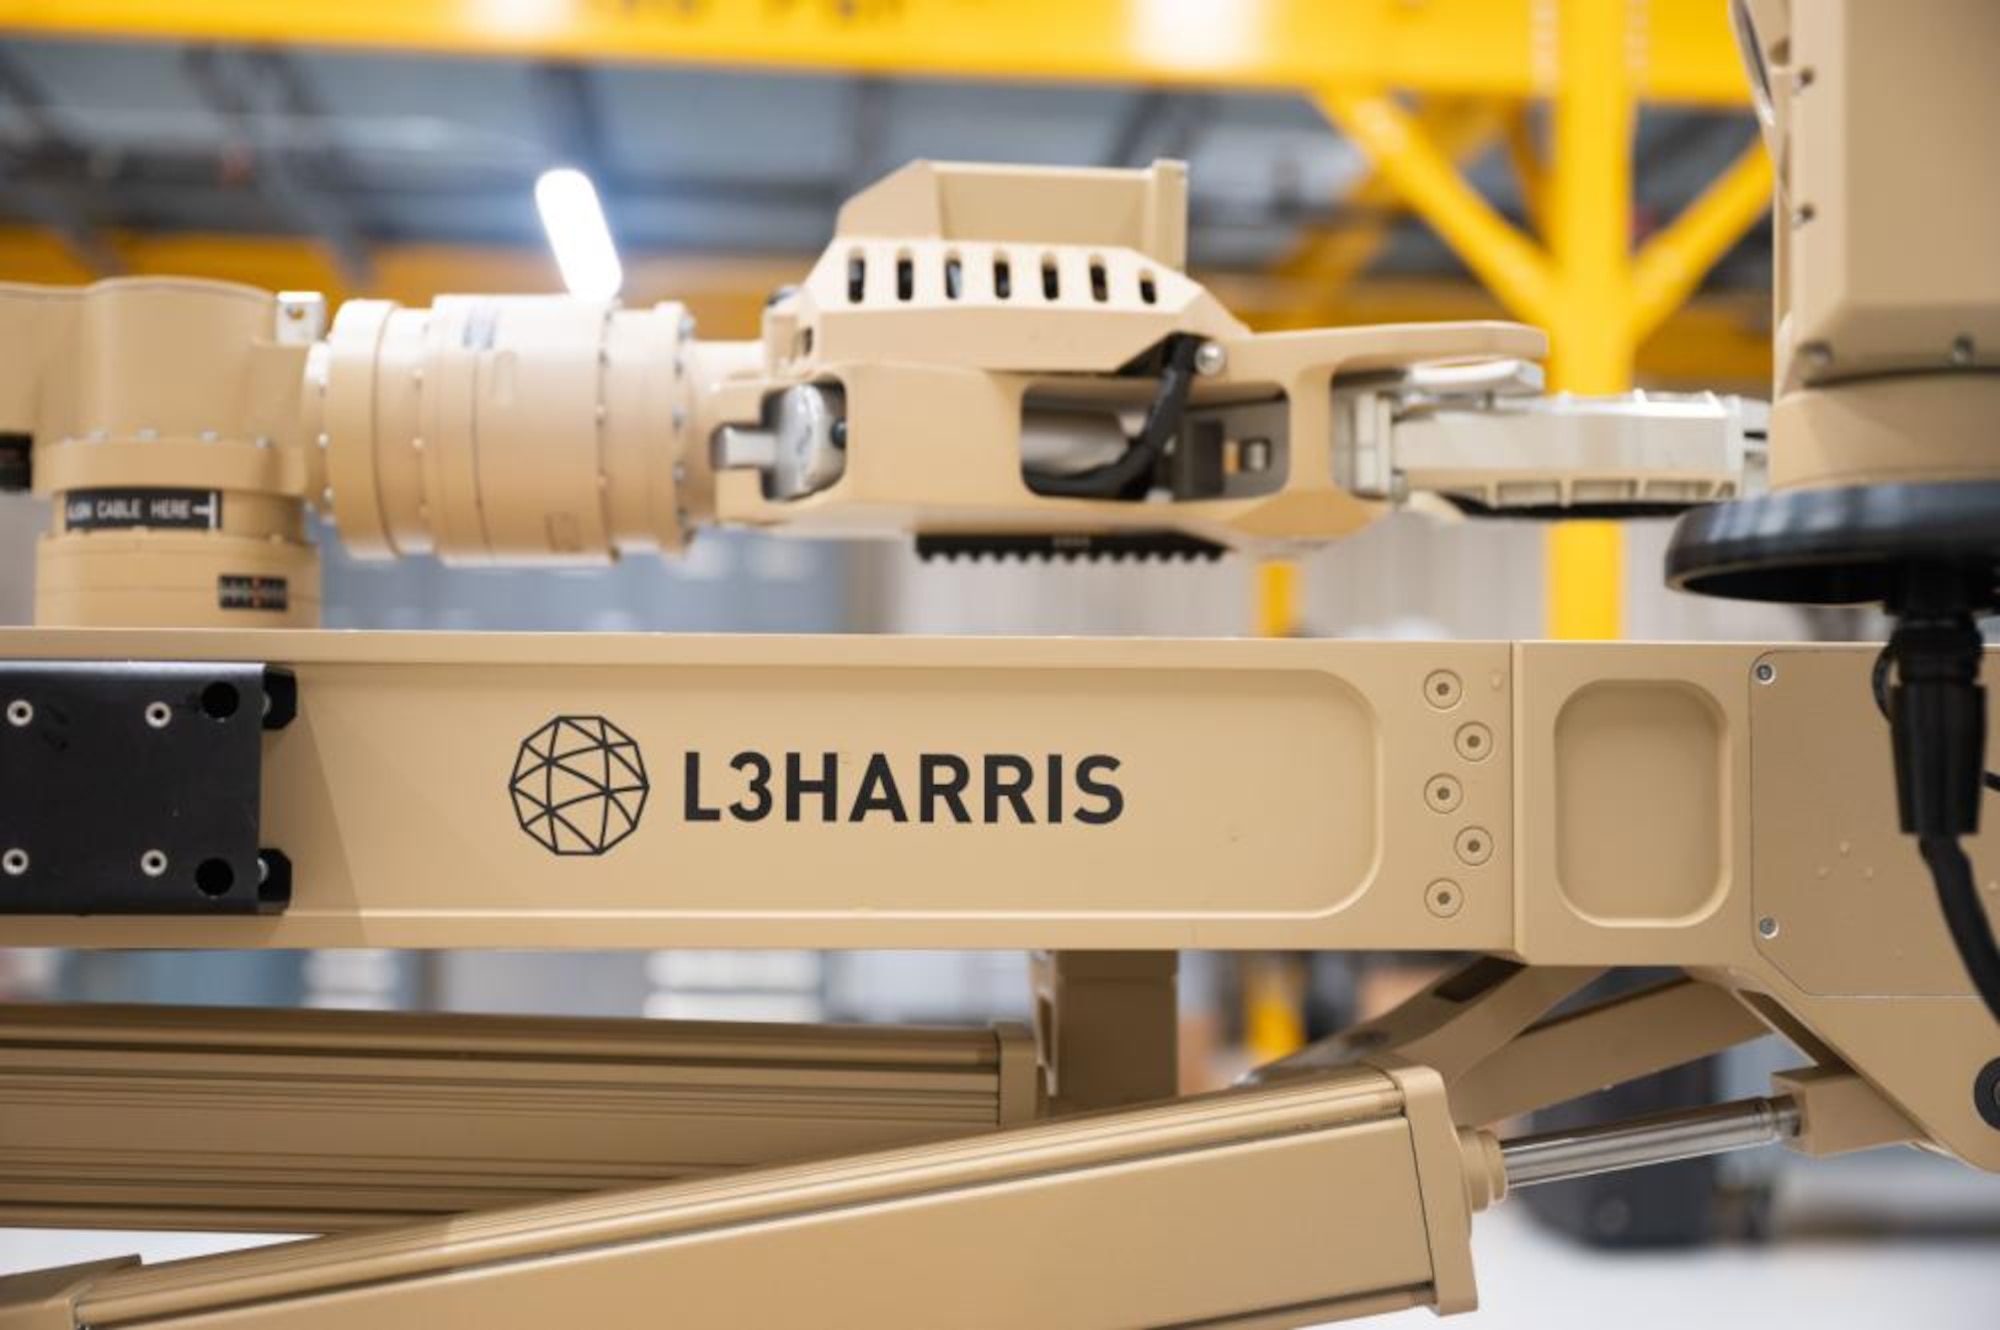 The base is among the first in the U.S. Air Force to deploy a new Explosive Ordnance Disposal robot platform, the L3Harris T7 Multi-Mission Robotics System.